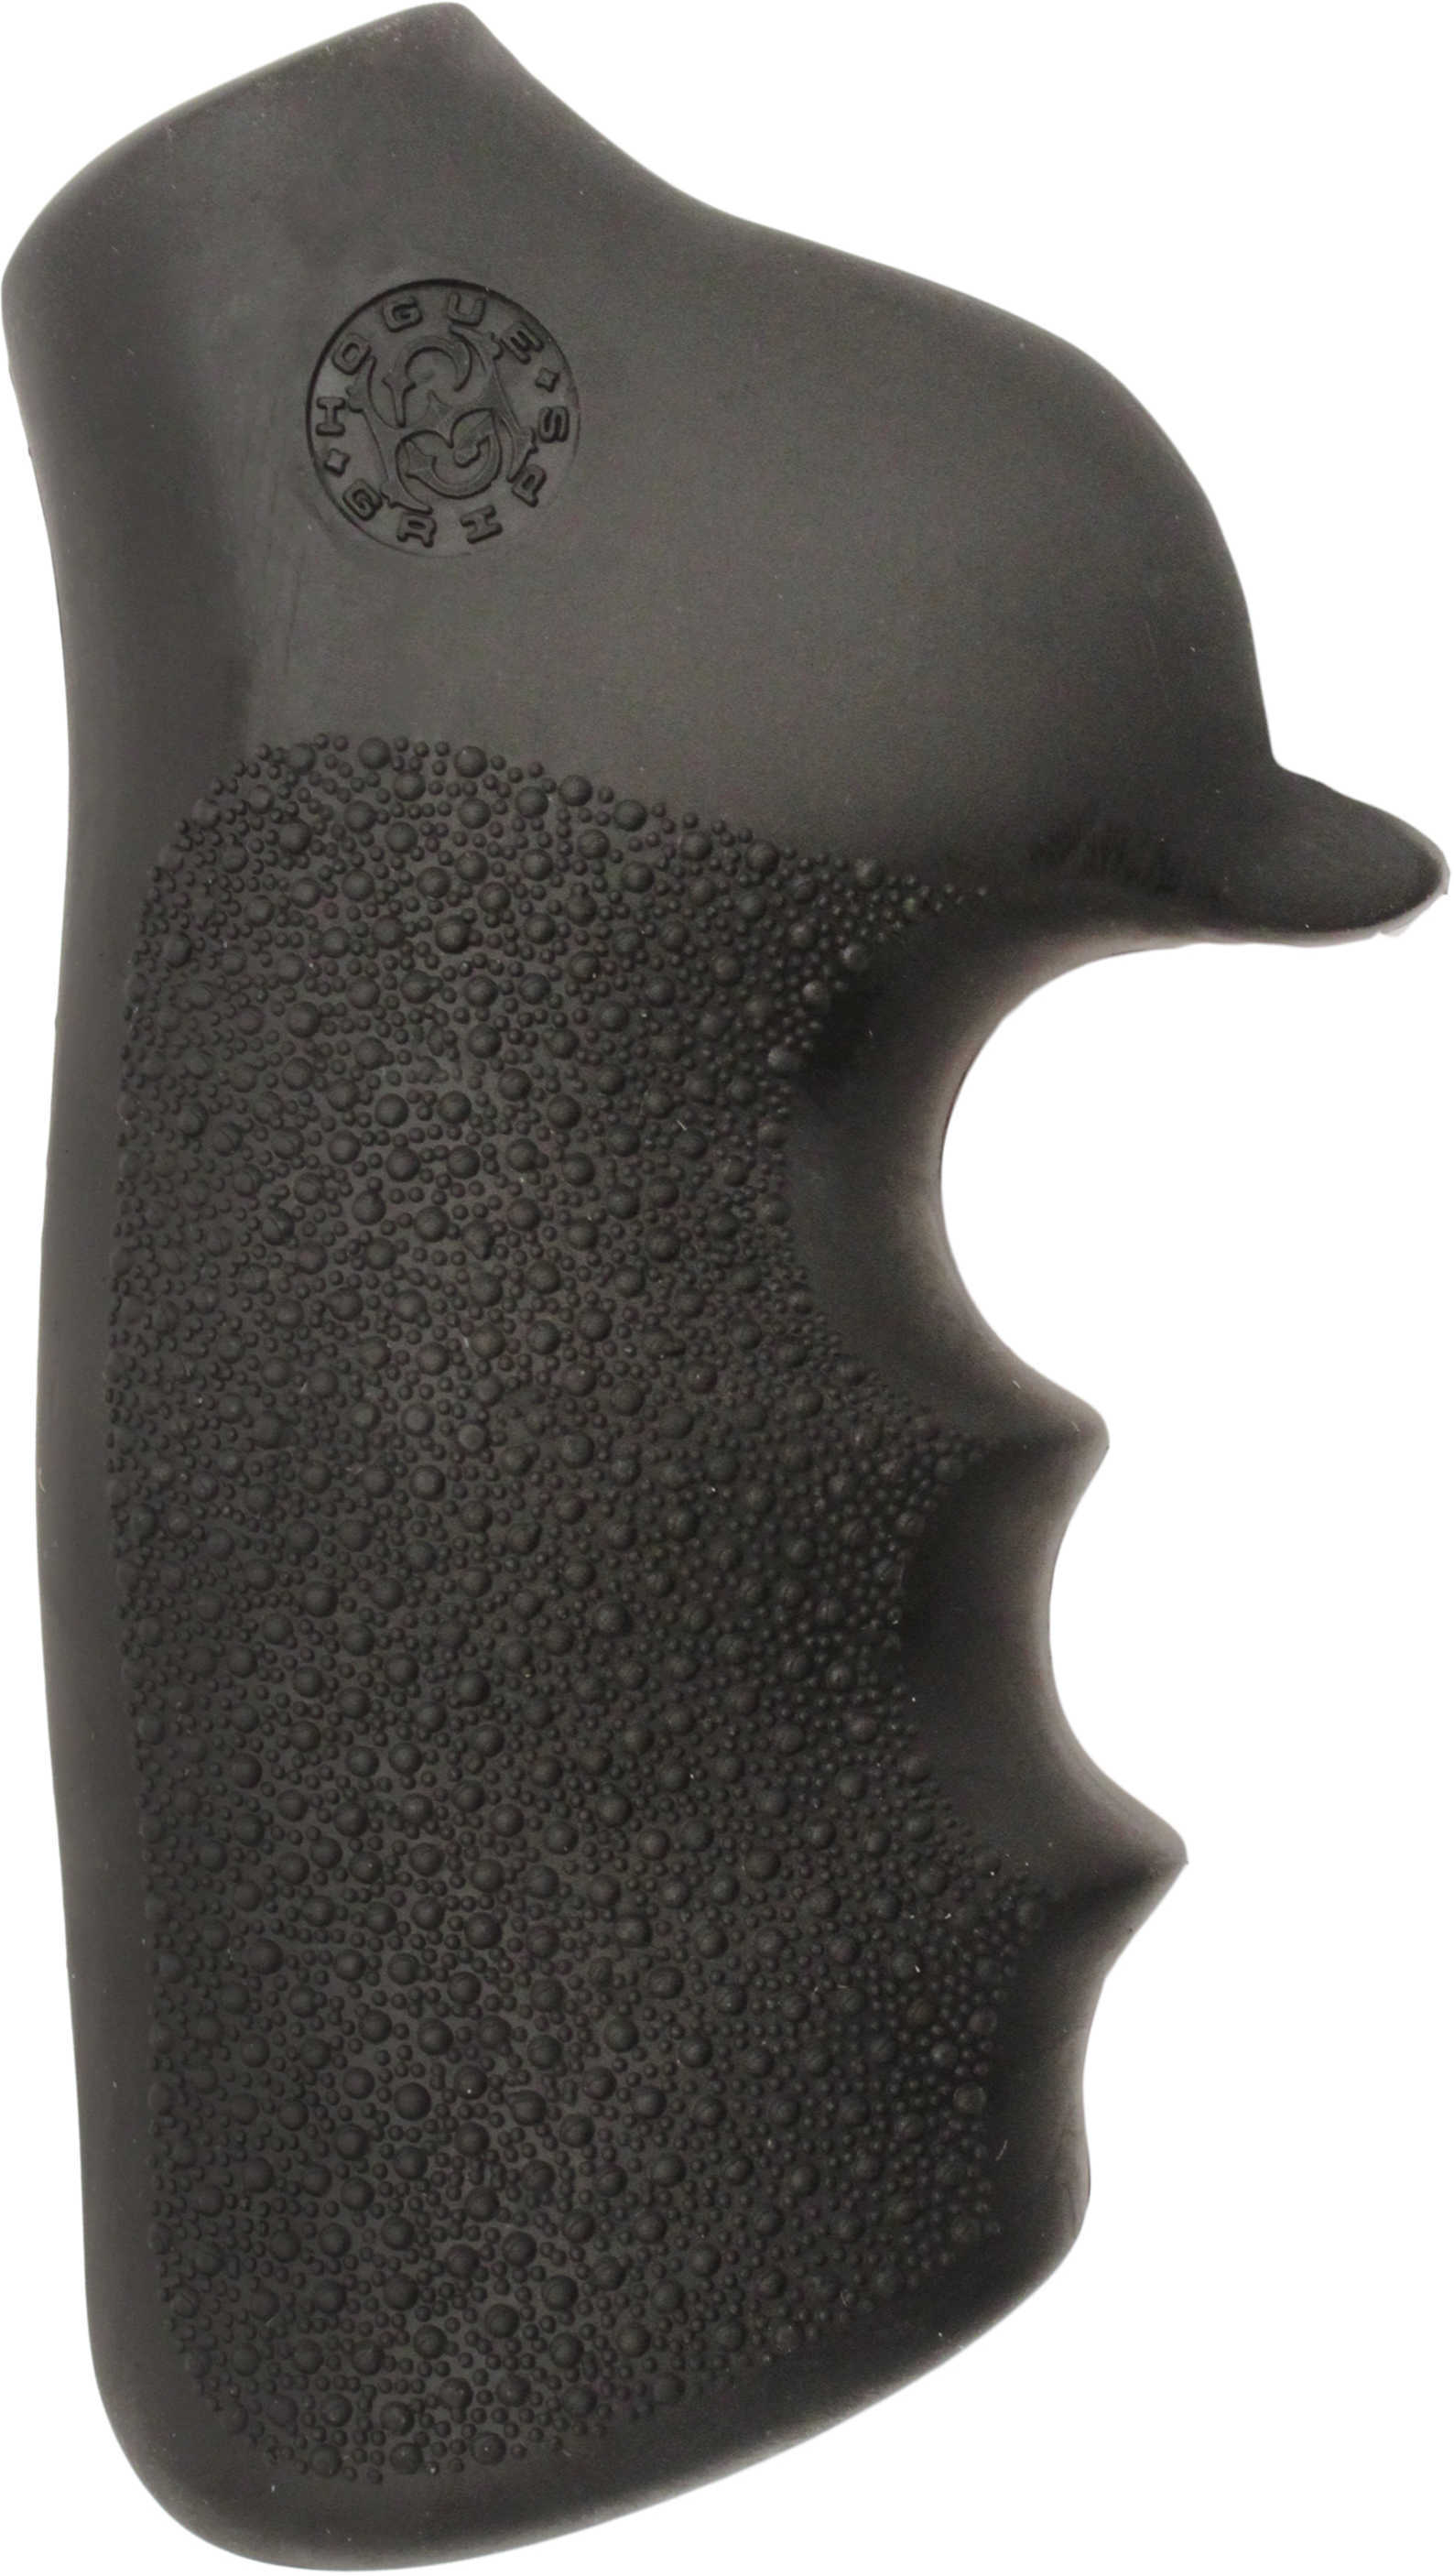 Hogue Rubber Grip for Ruger GP 100 and Super Redhawk Revolvers 80020-img-1